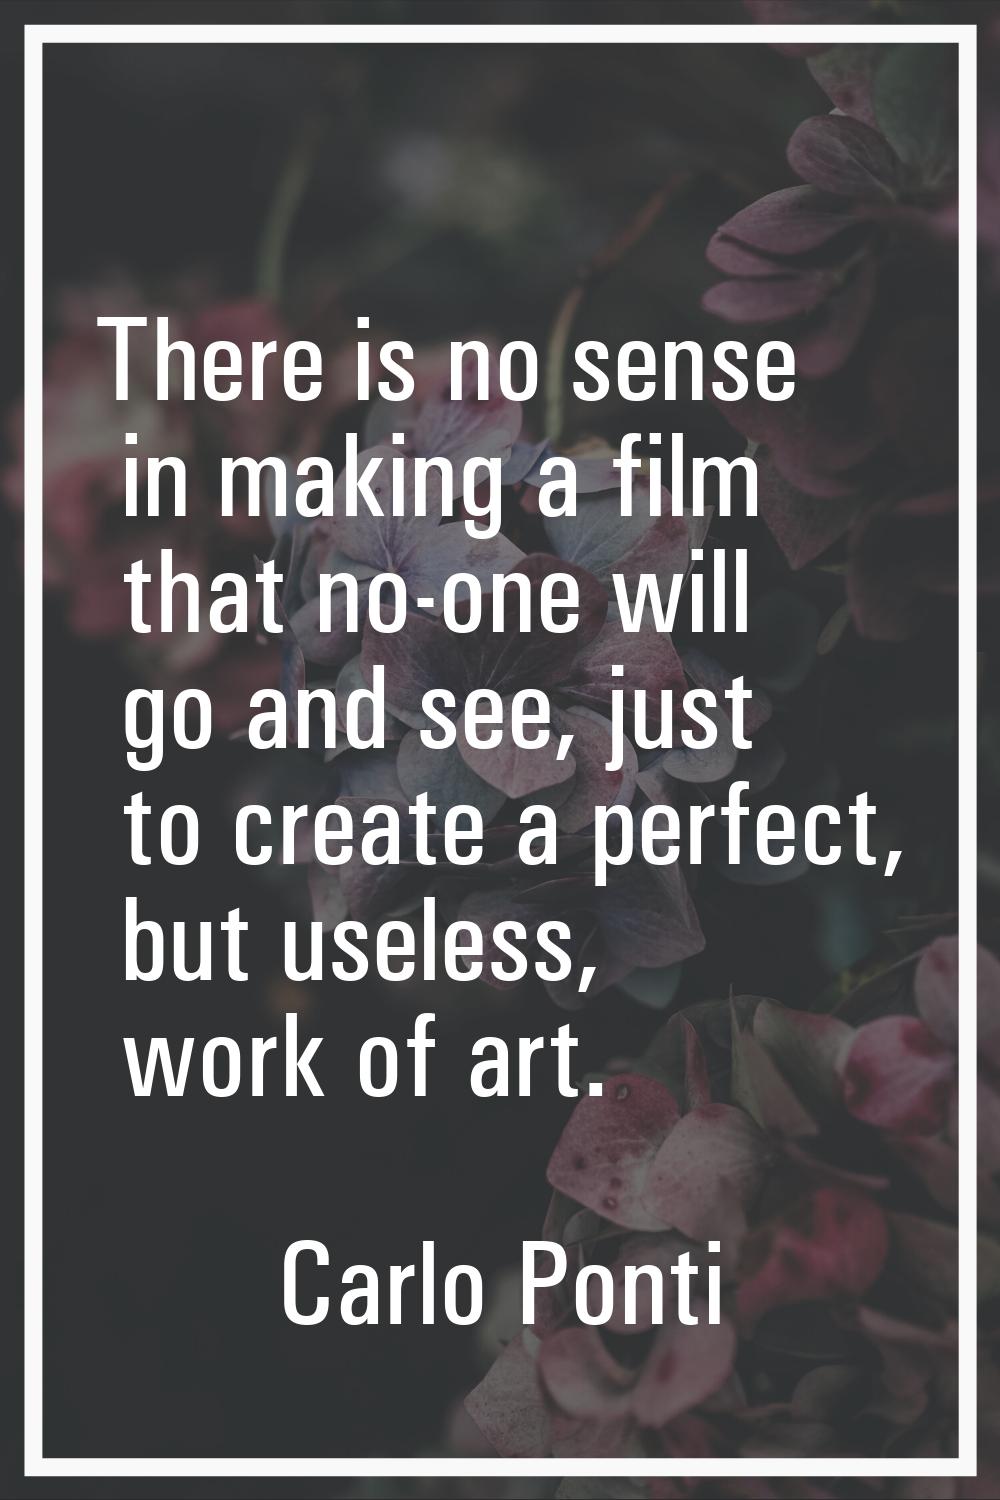 There is no sense in making a film that no-one will go and see, just to create a perfect, but usele